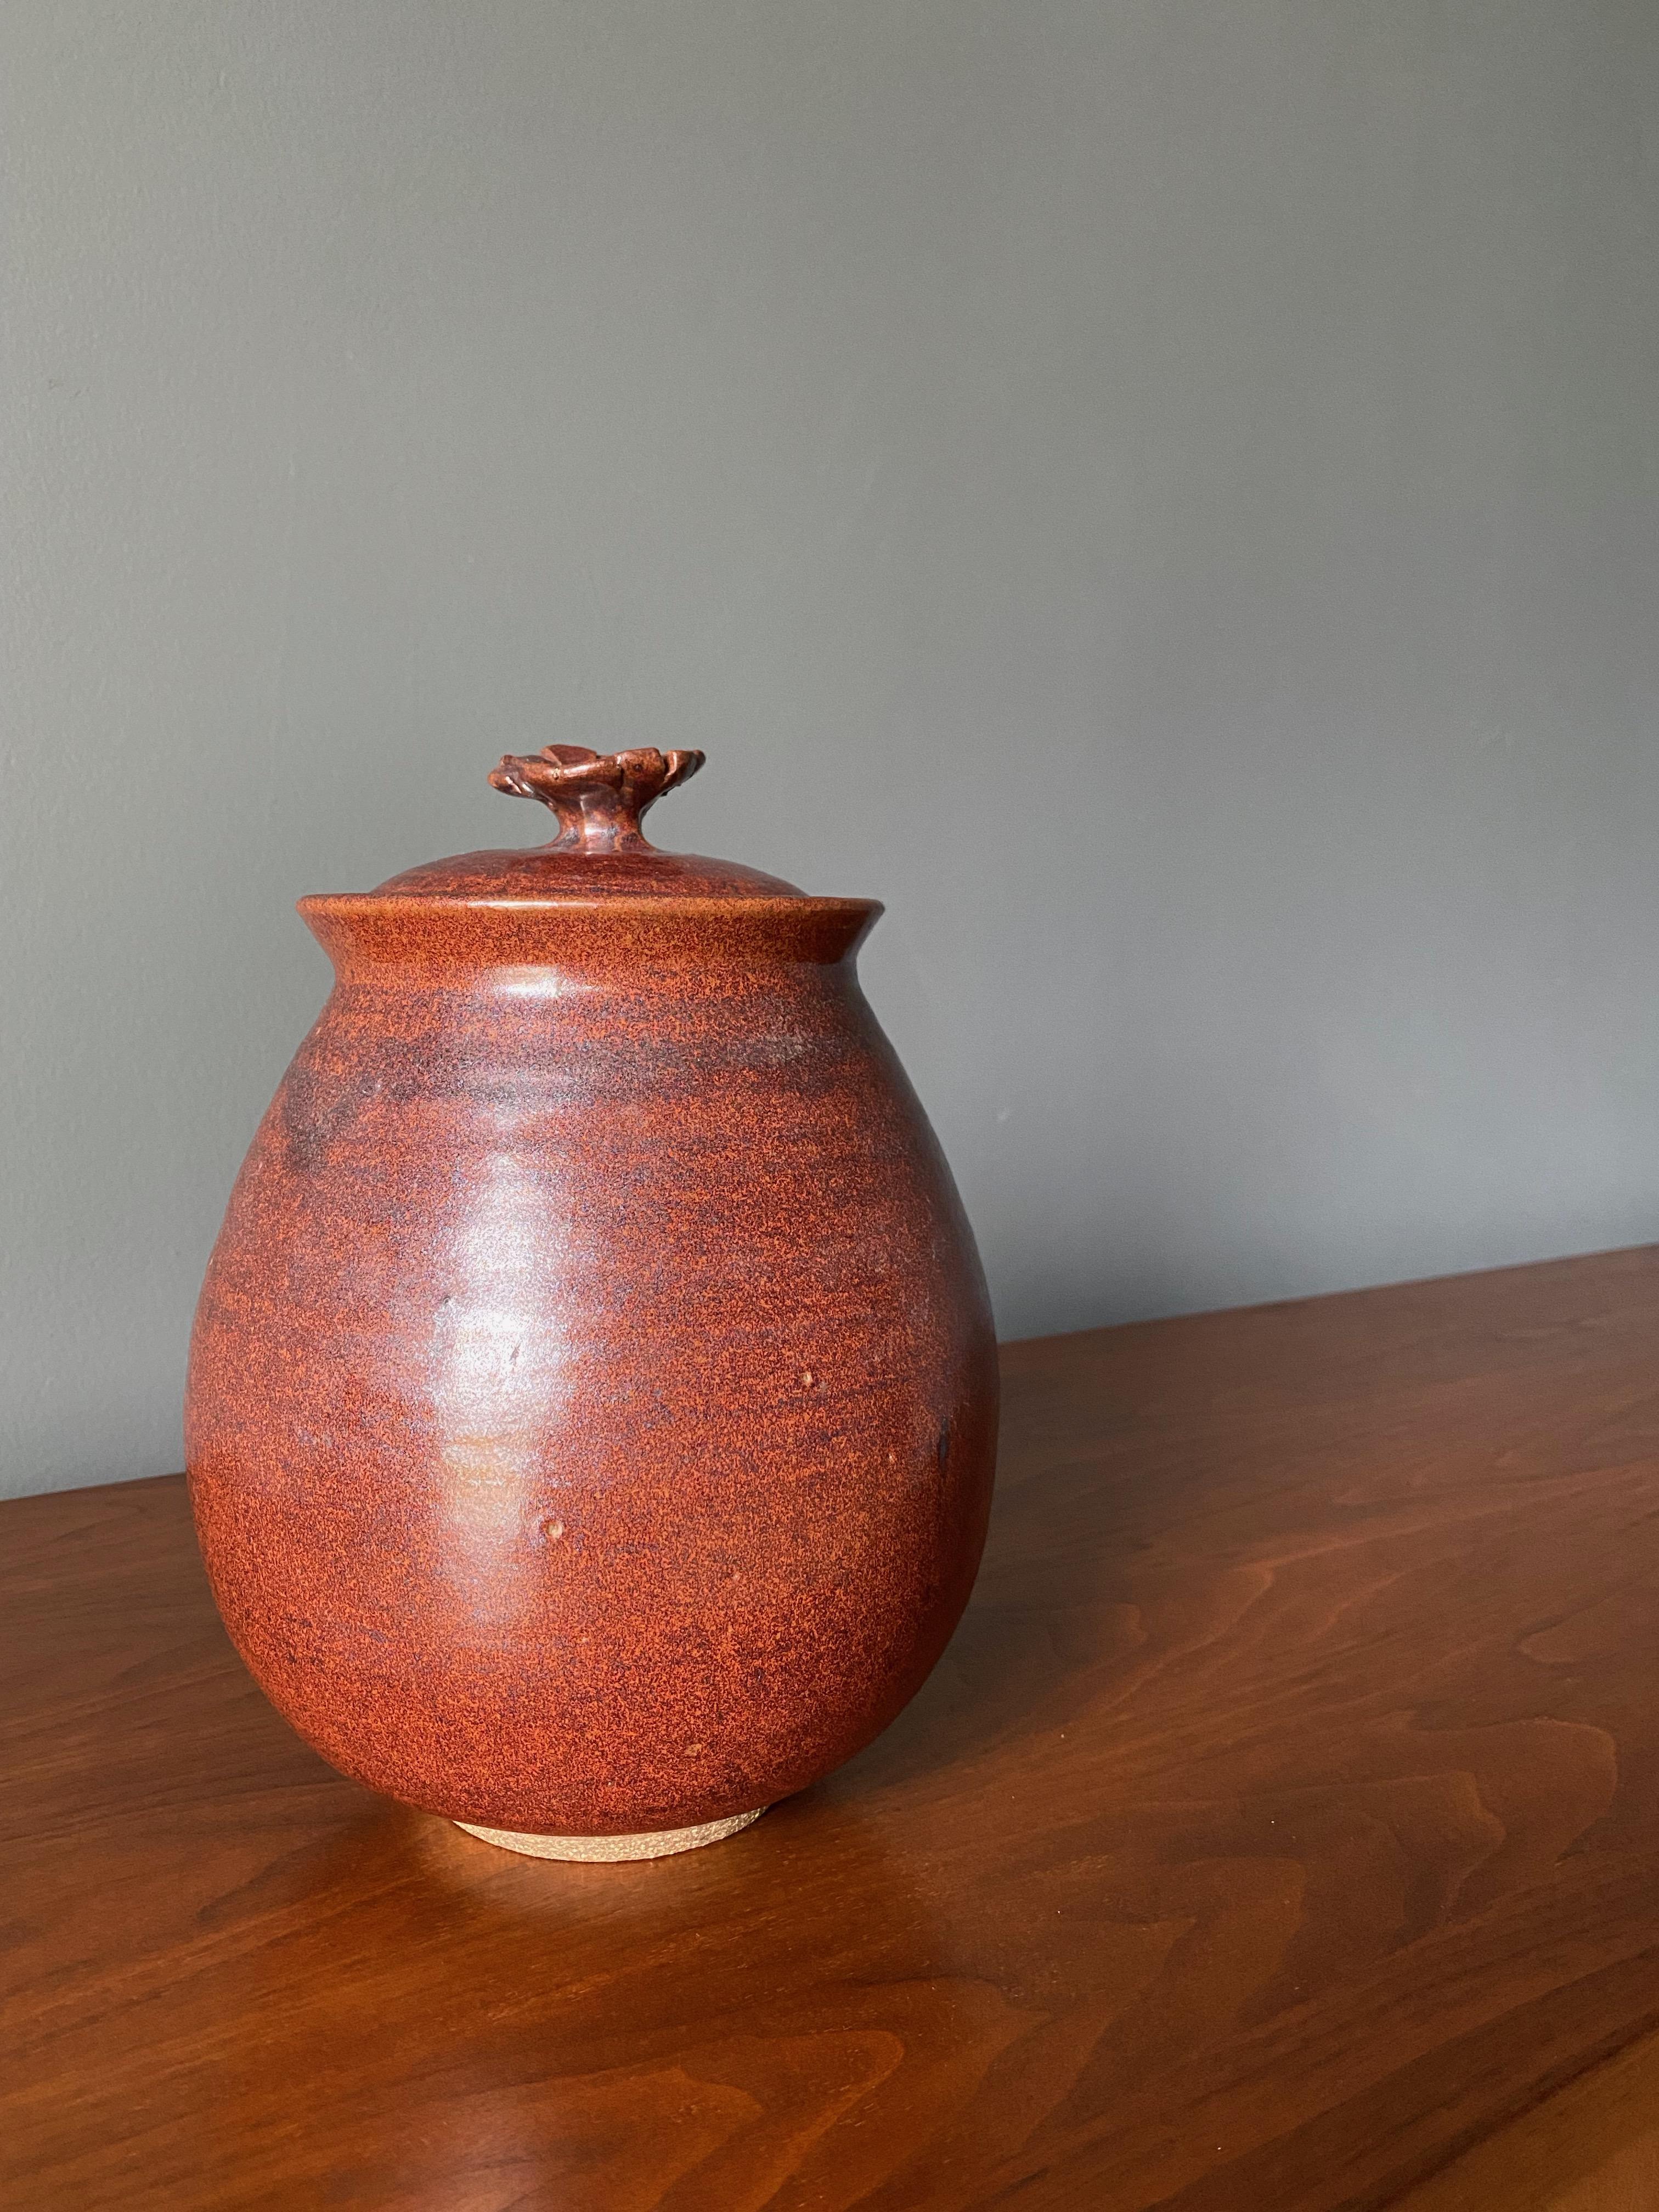 Vintage studio pottery. Ceramic jar with lid. Beautifully and thoughtfully crafted with a uniquely shaped handle.